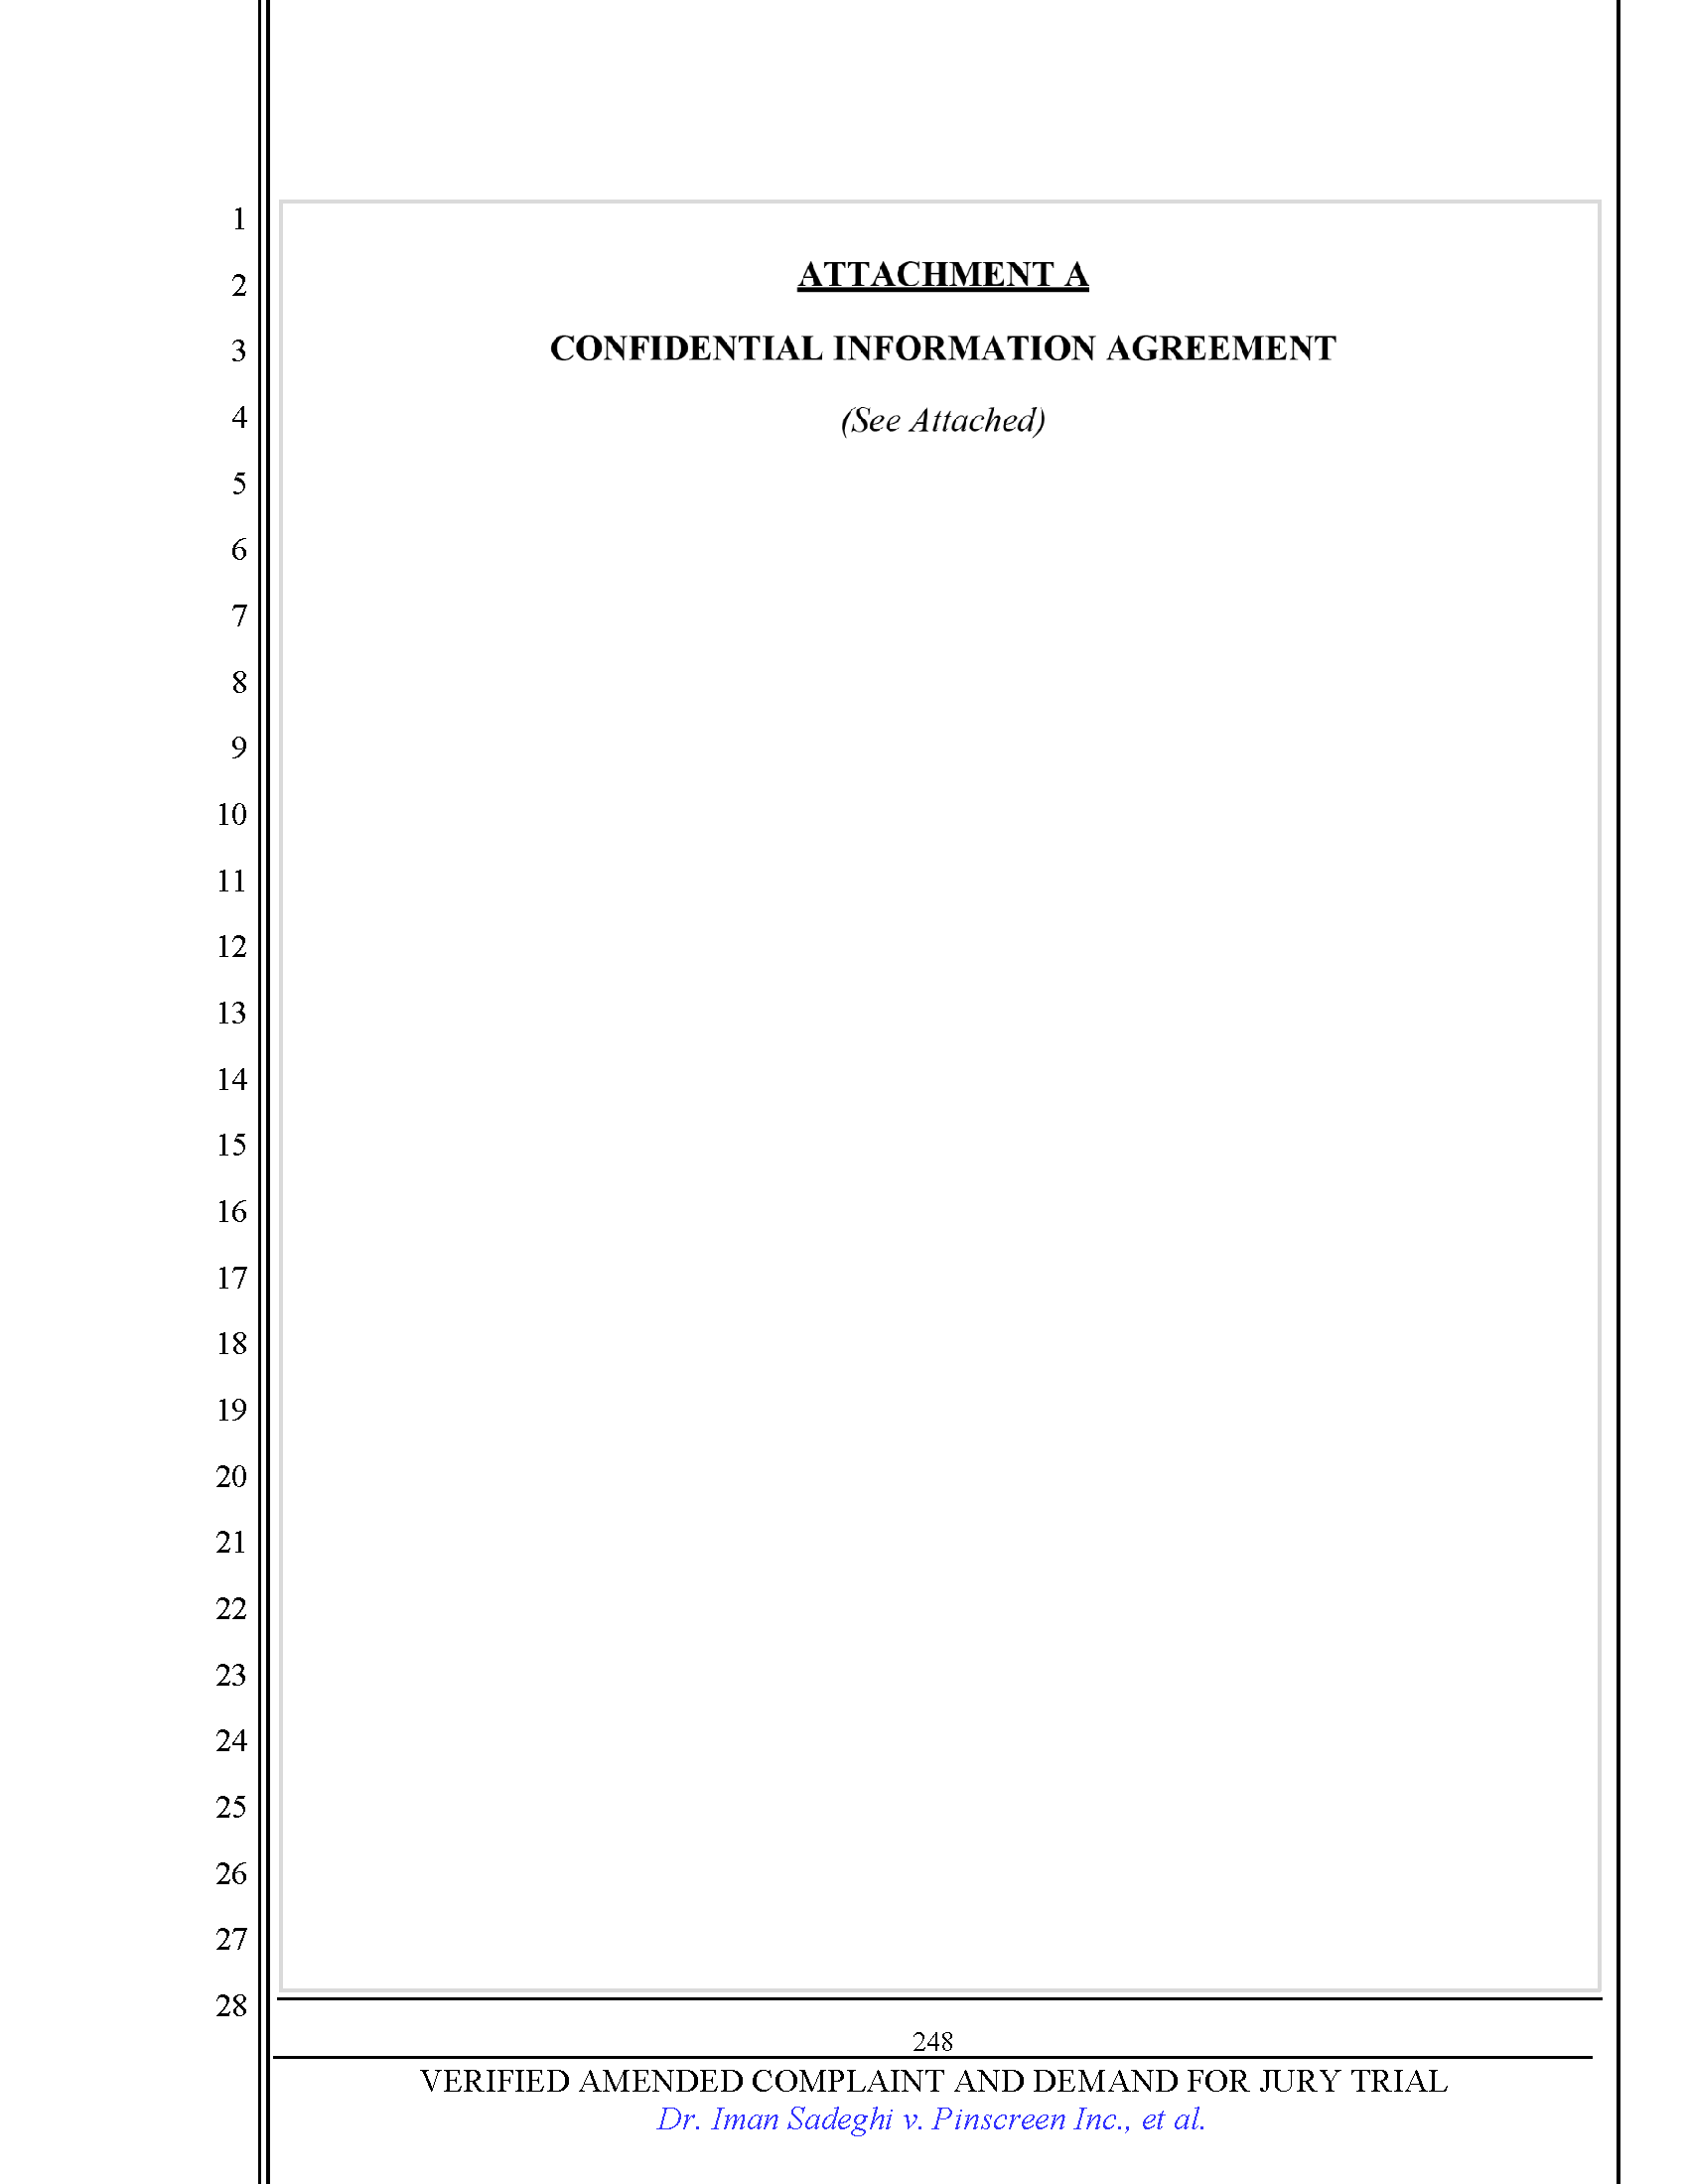 First Amended Complaint (FAC) Page 248